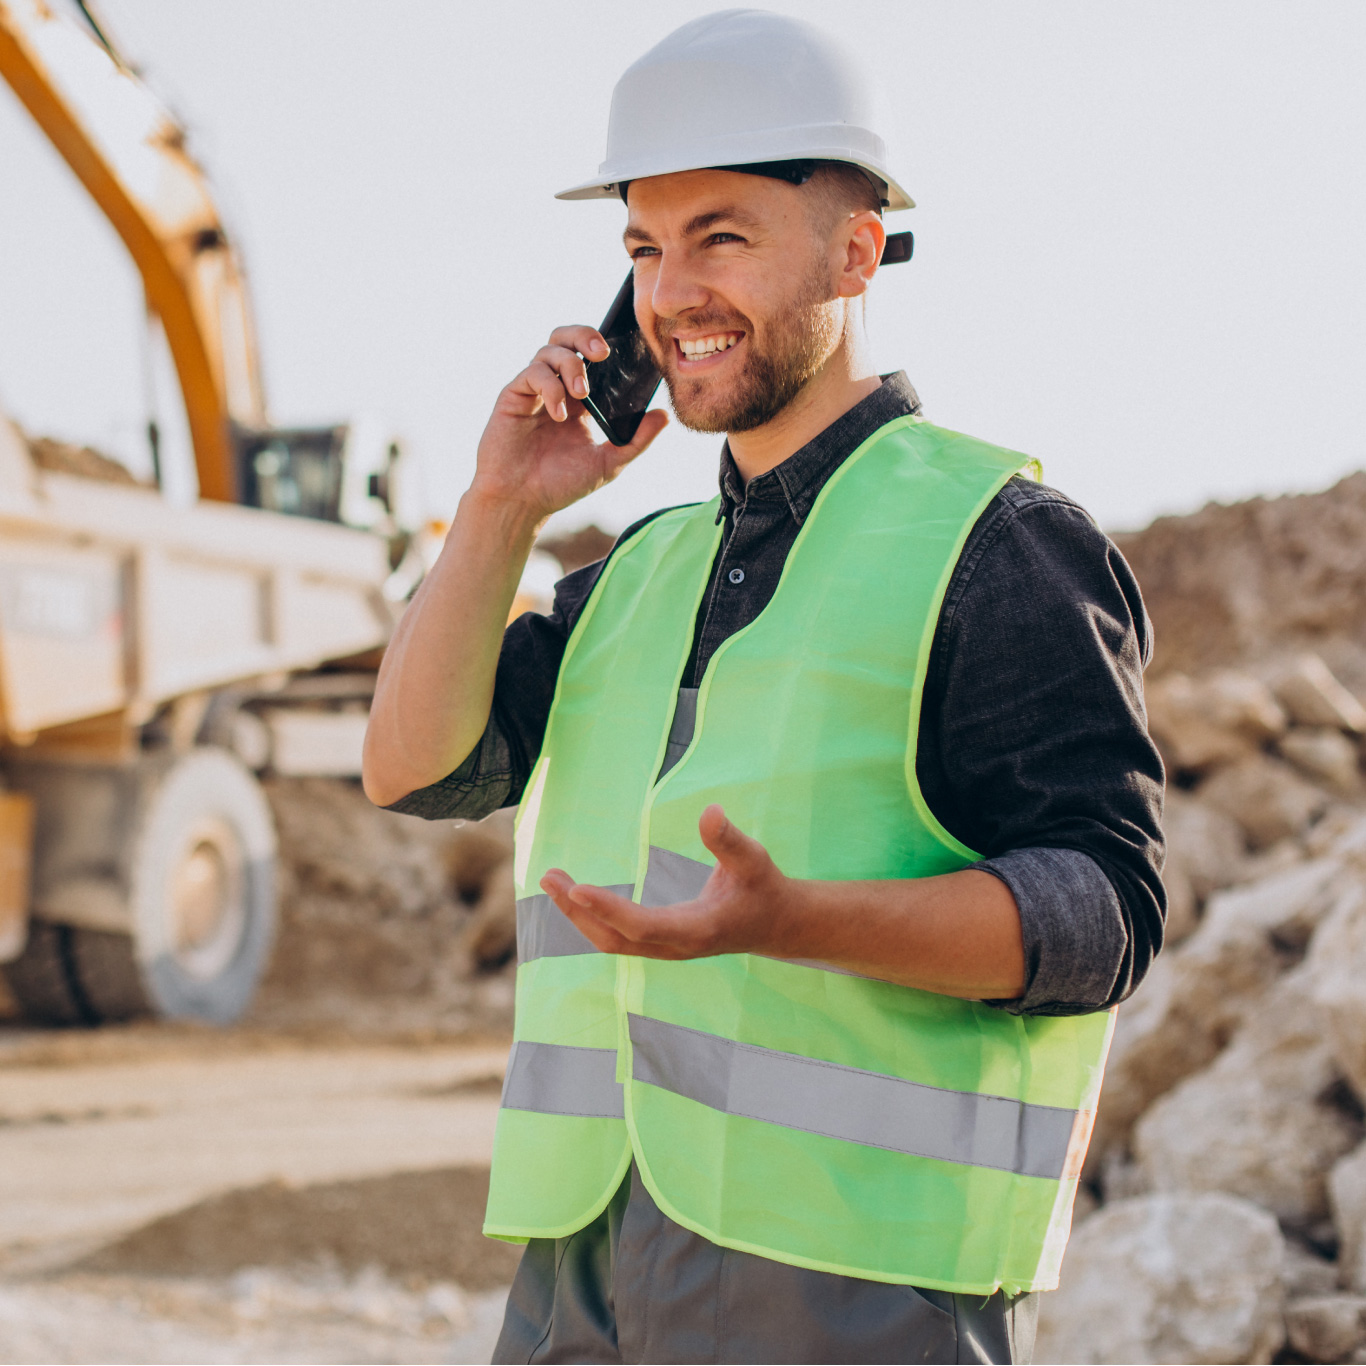 Man on a construction site wearing a hard hat and high vis while on the phone